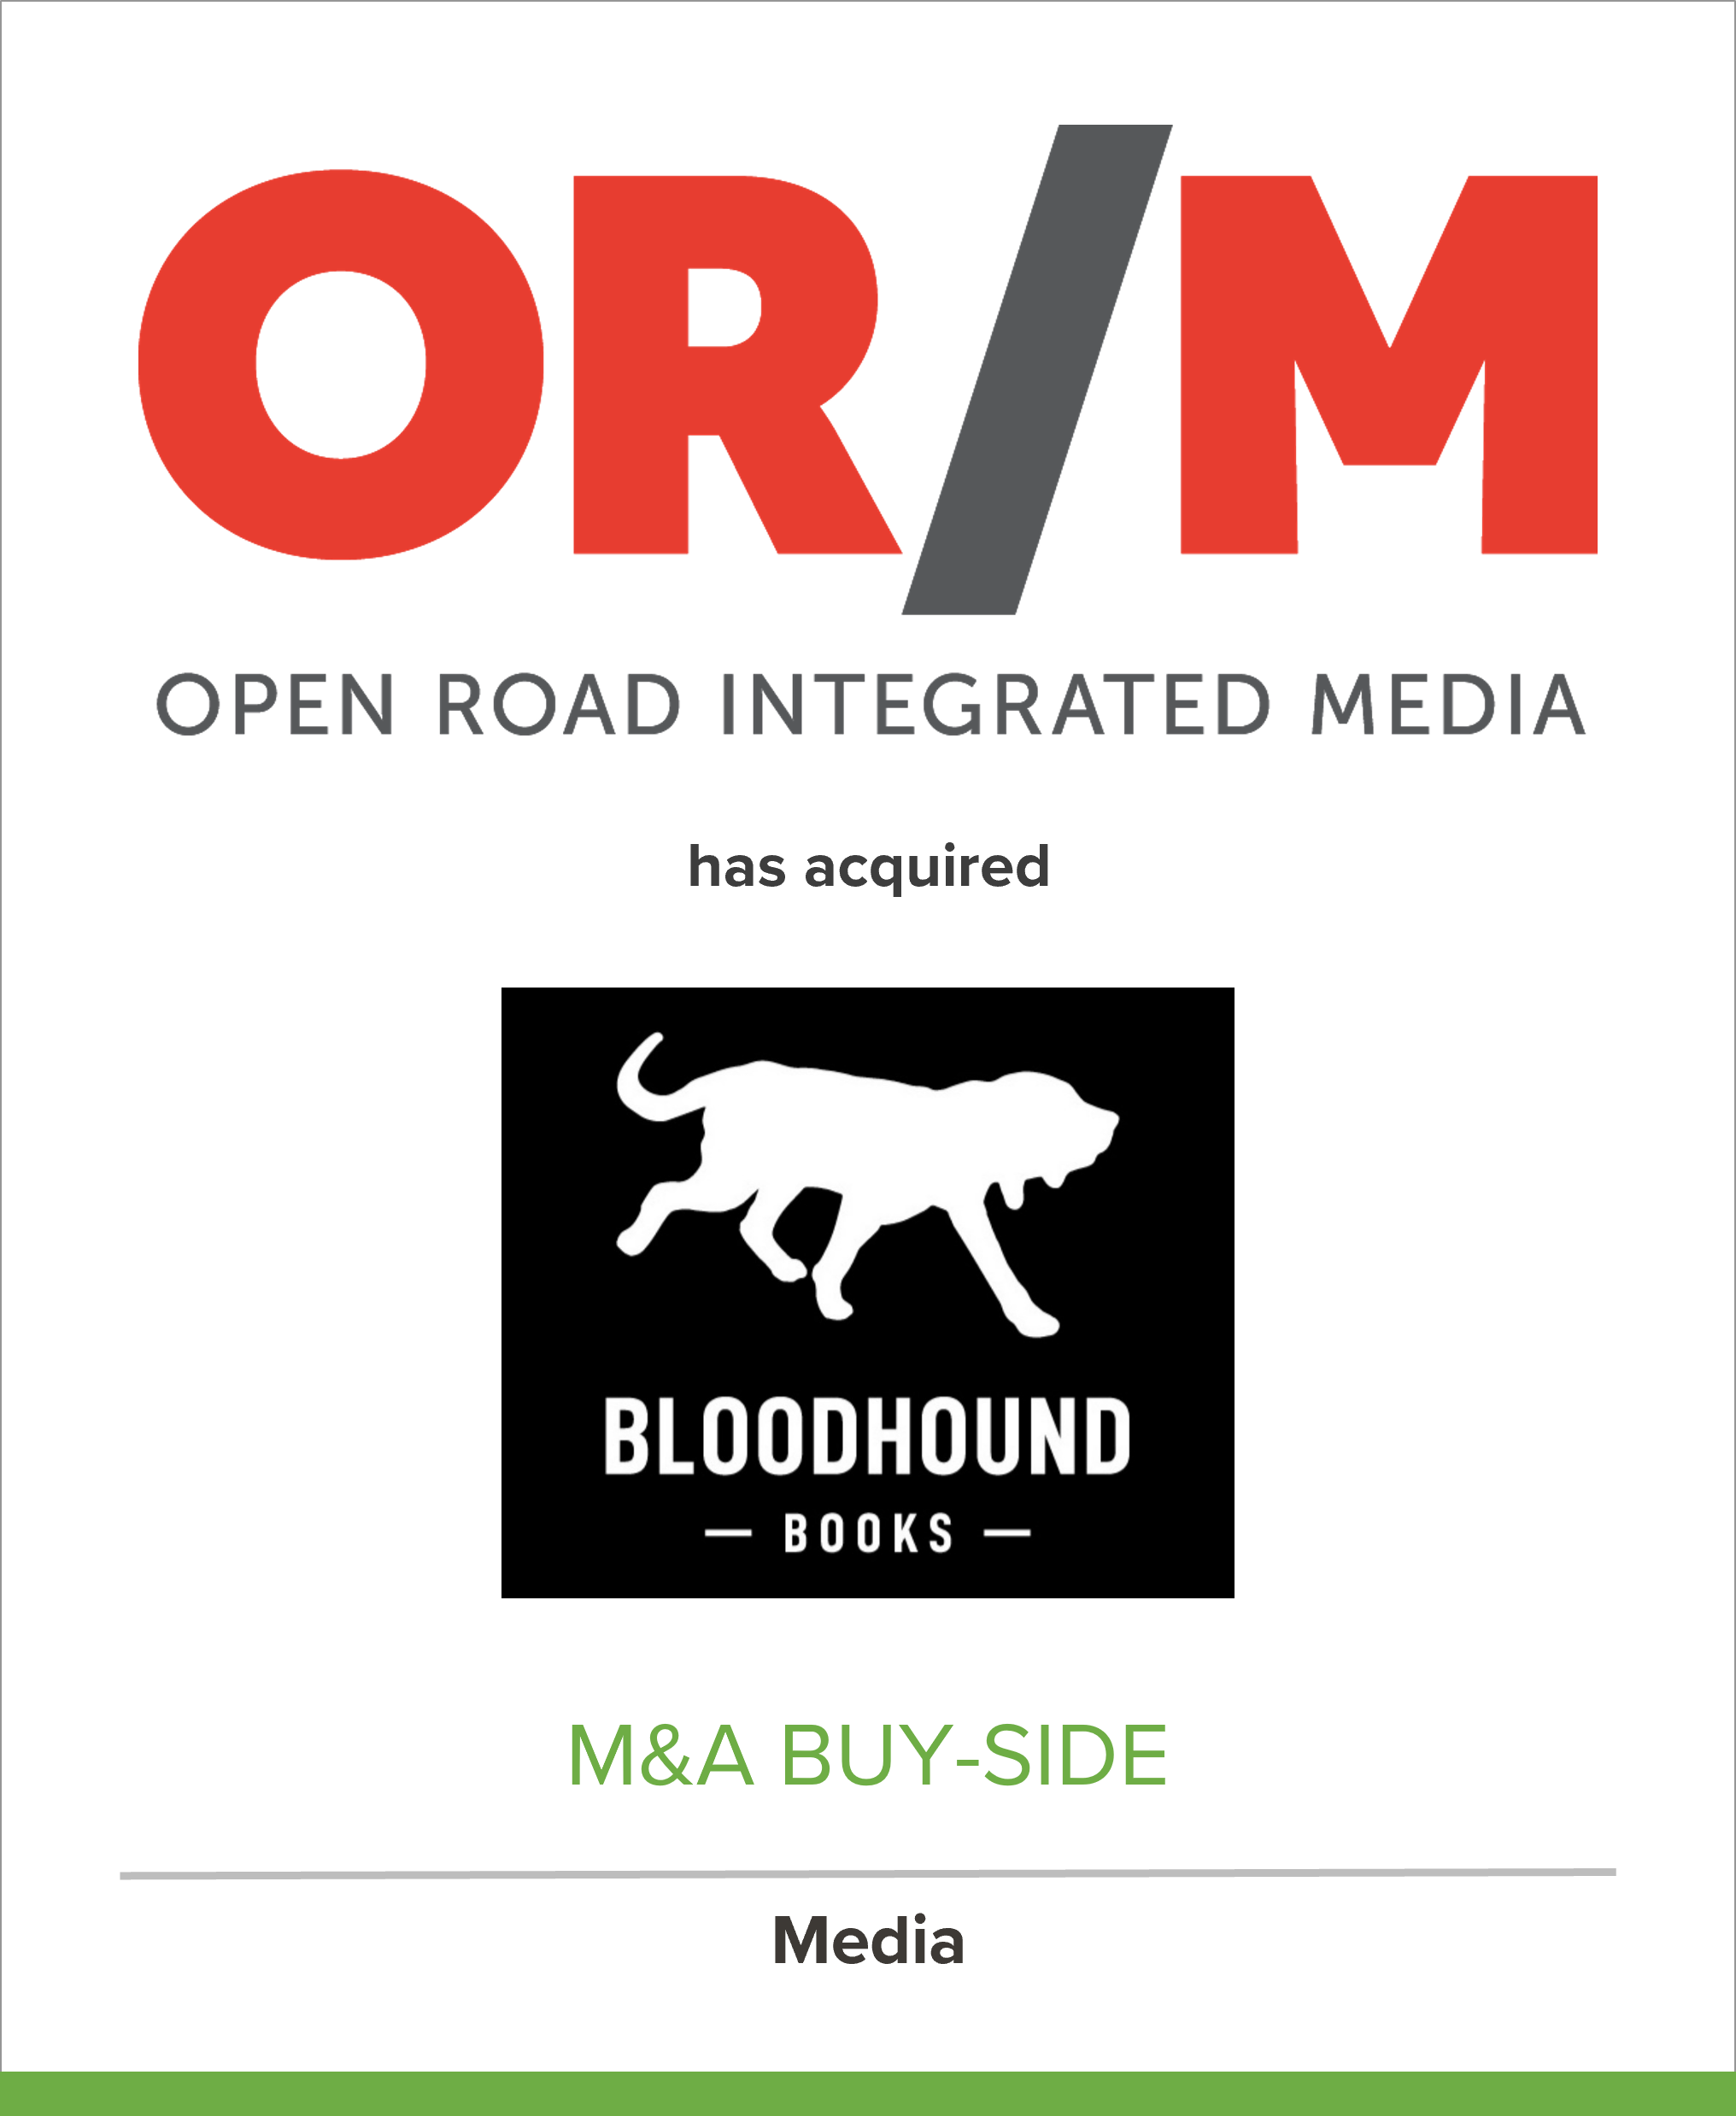 Open Road Integrated Media Has Acquired Bloodhound Books